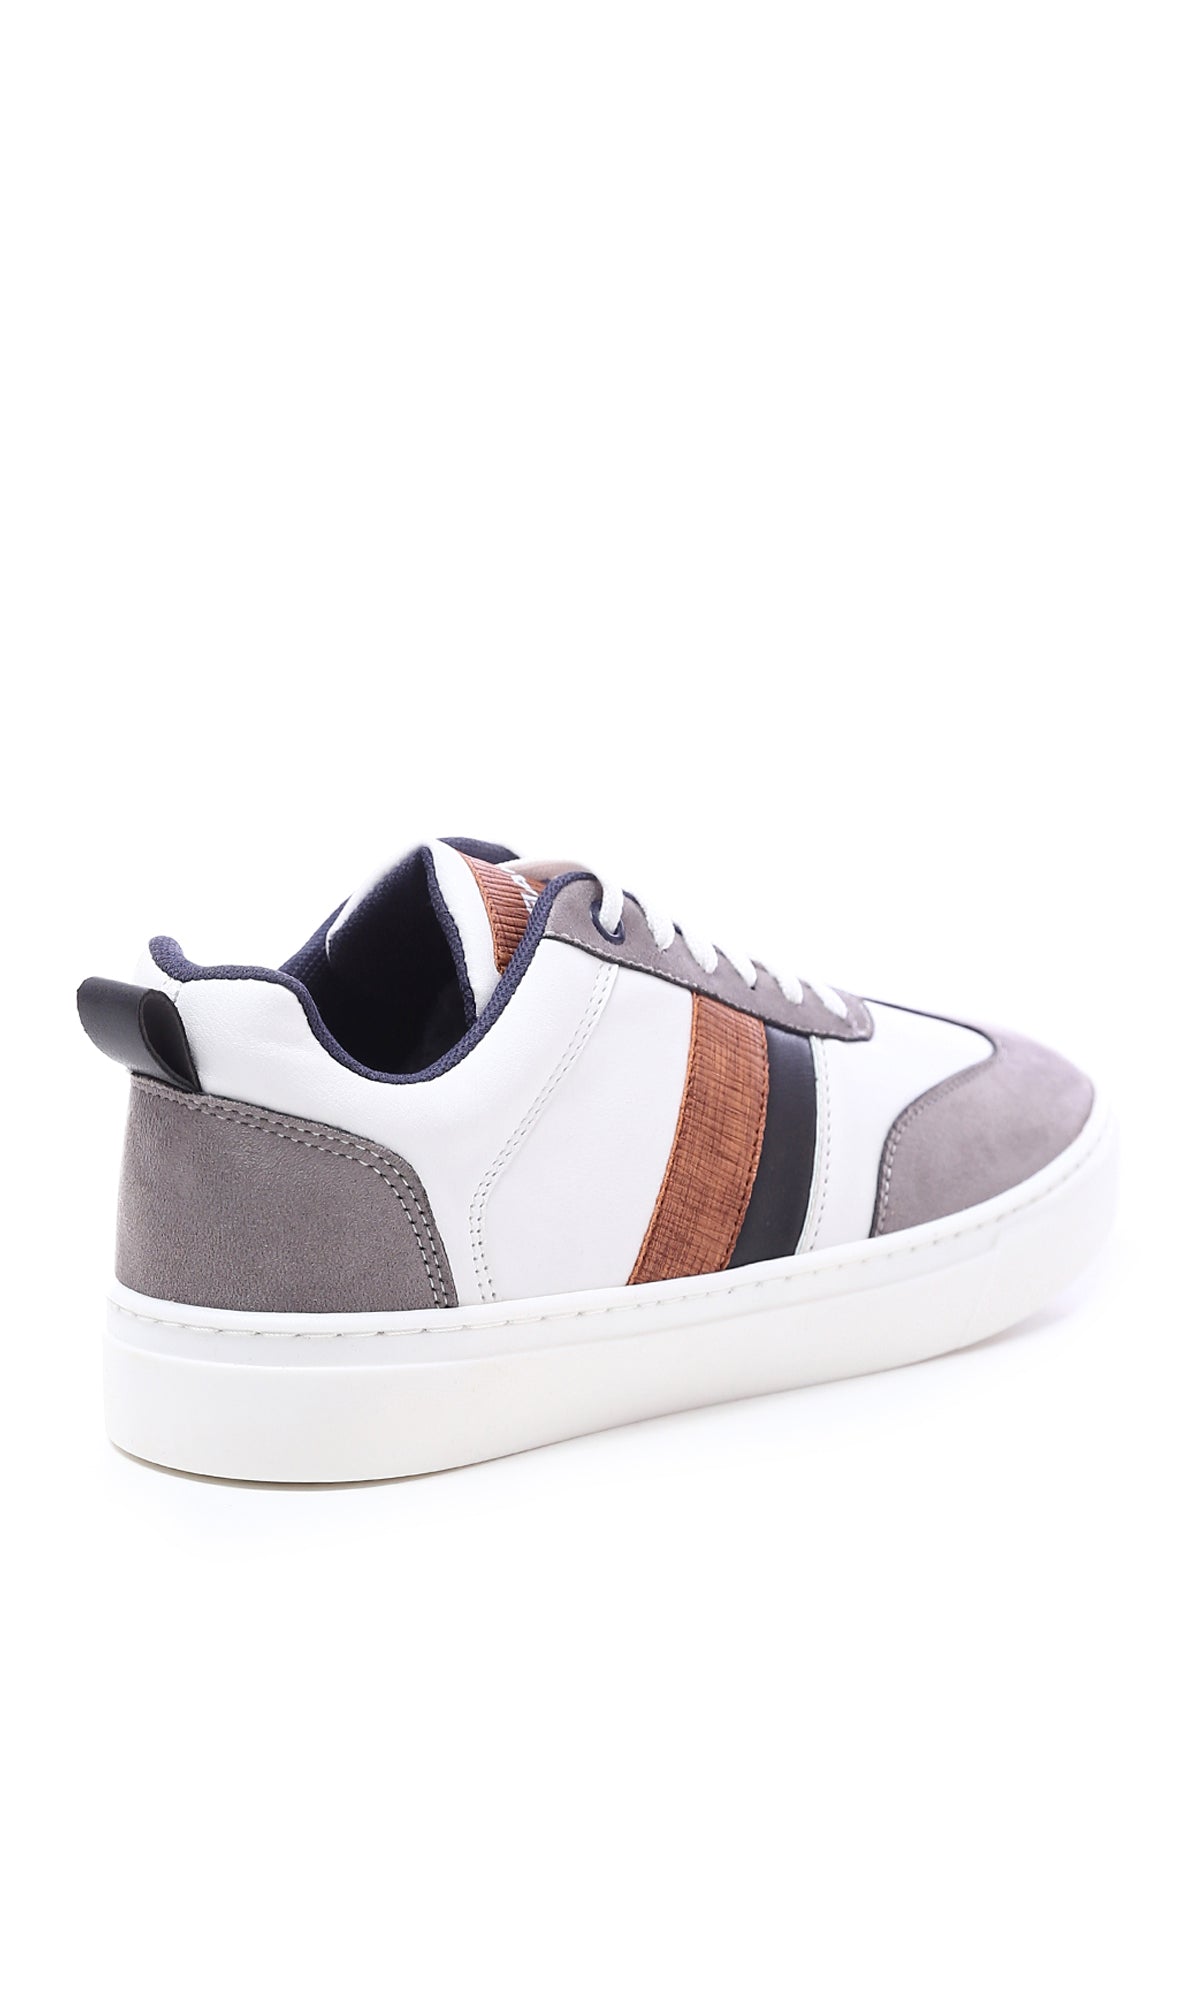 O176723 Round Toecap Lace Up Casual Shoes - Grey & White